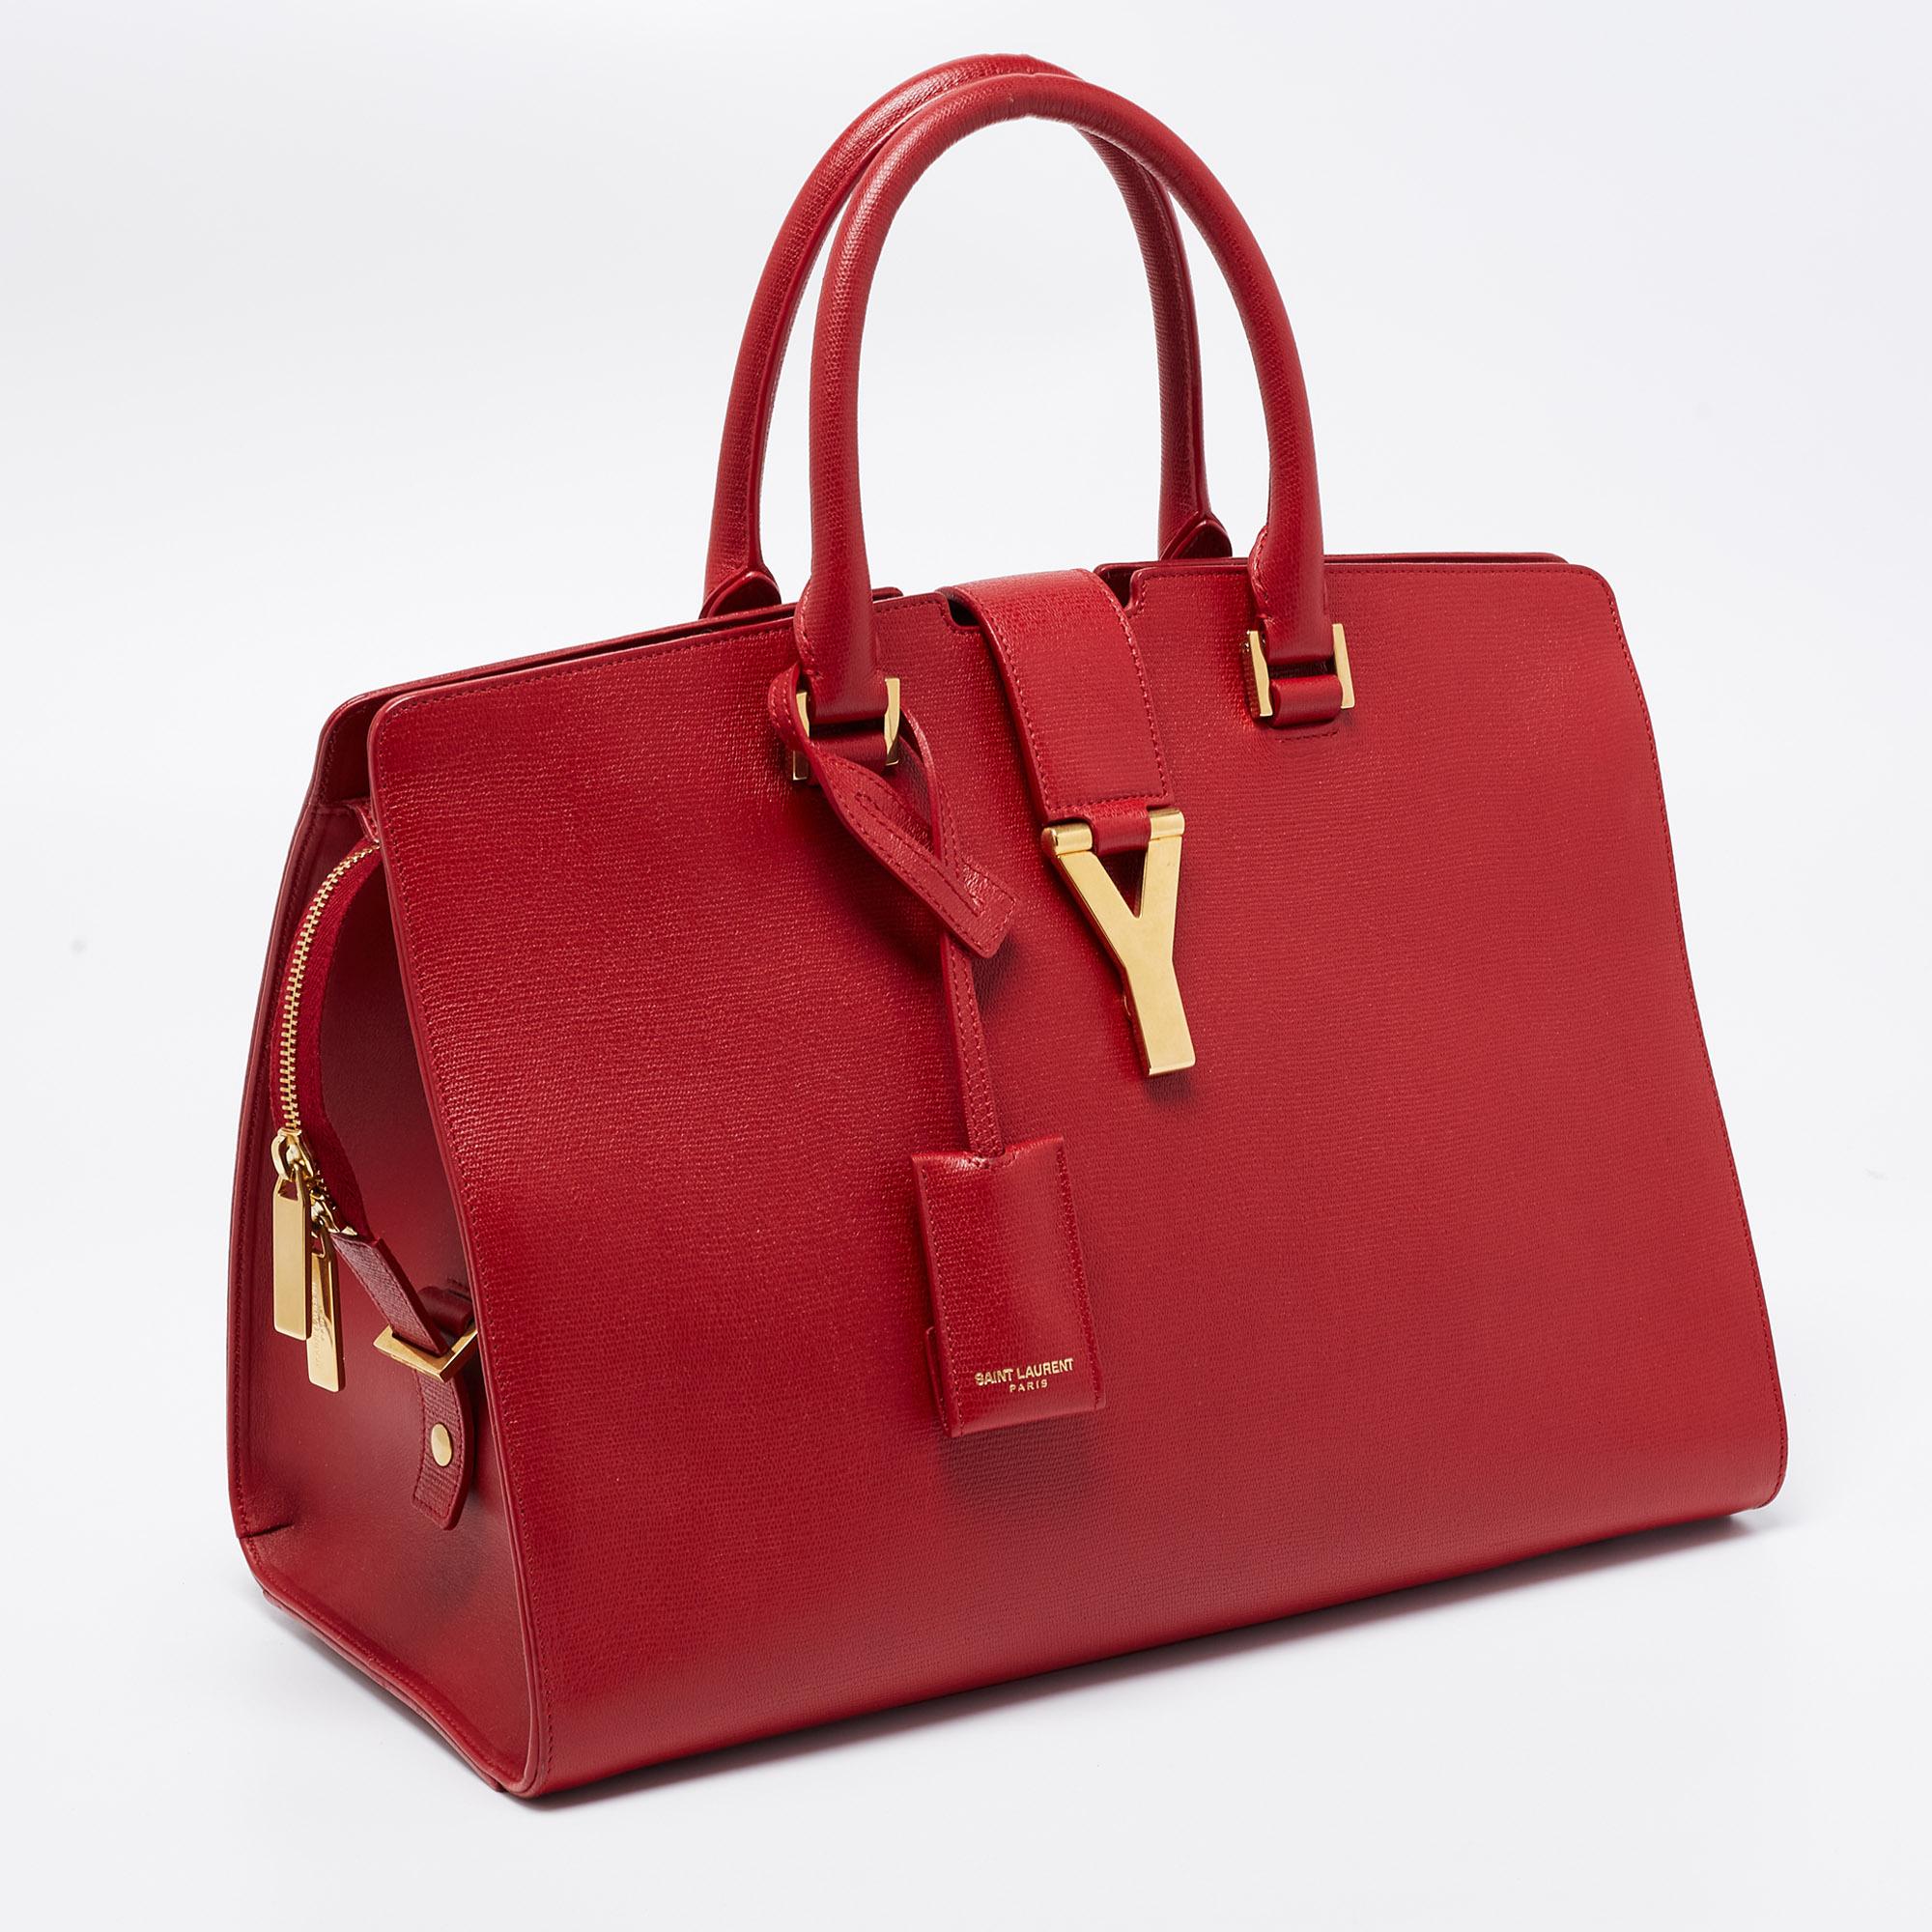 Women's Yves Saint Laurent Red Leather Medium Cabas Chyc Tote